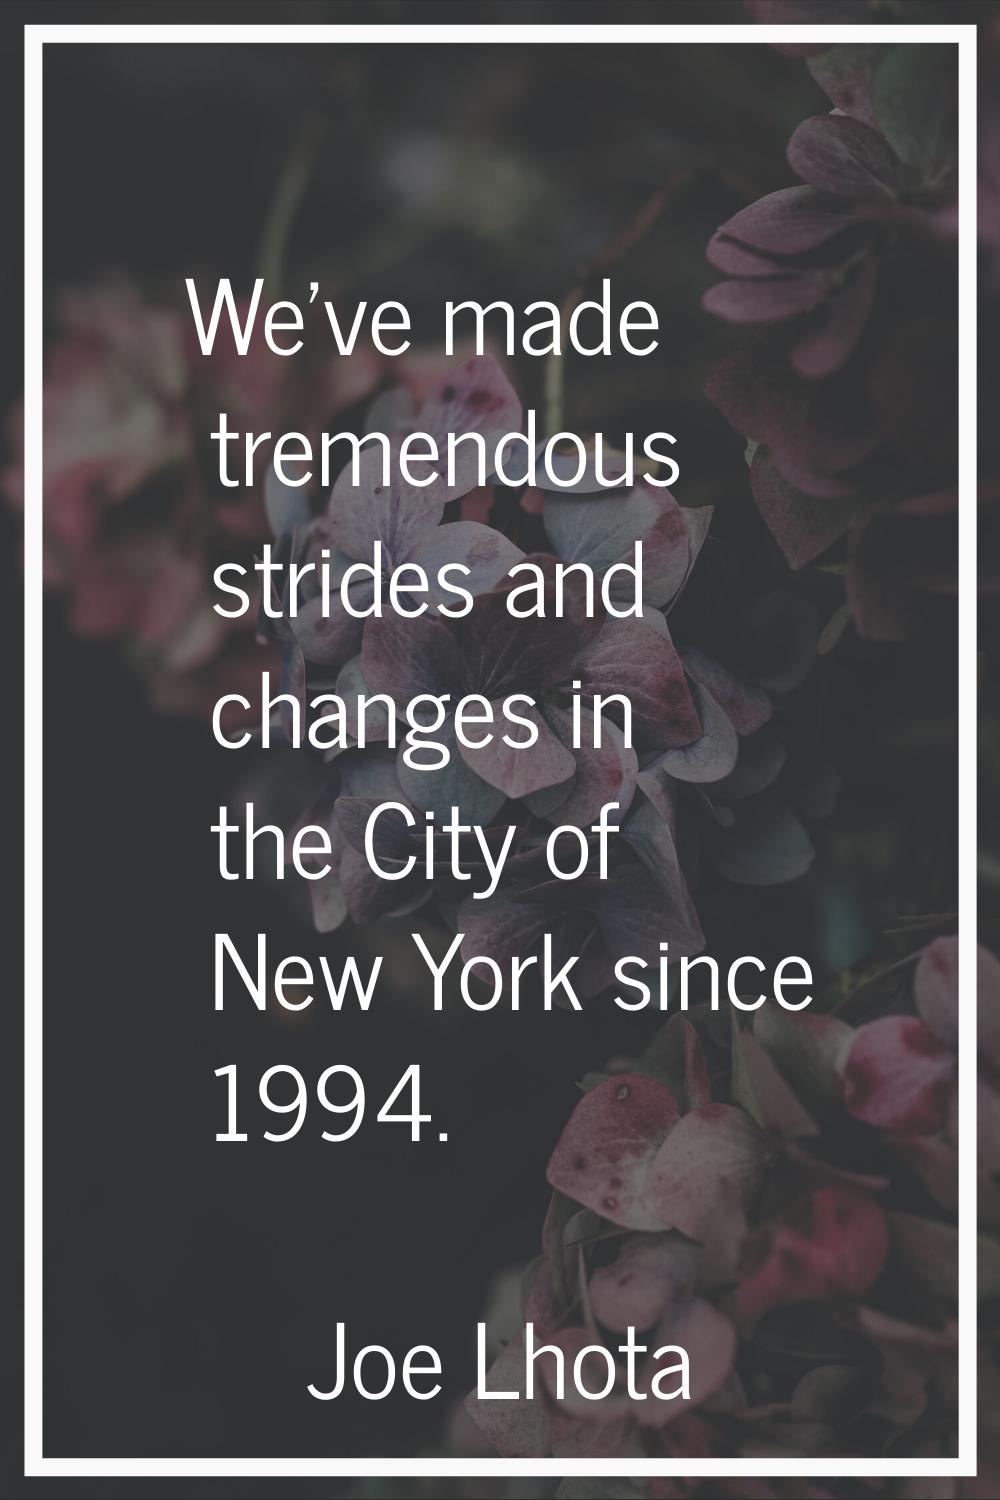 We've made tremendous strides and changes in the City of New York since 1994.